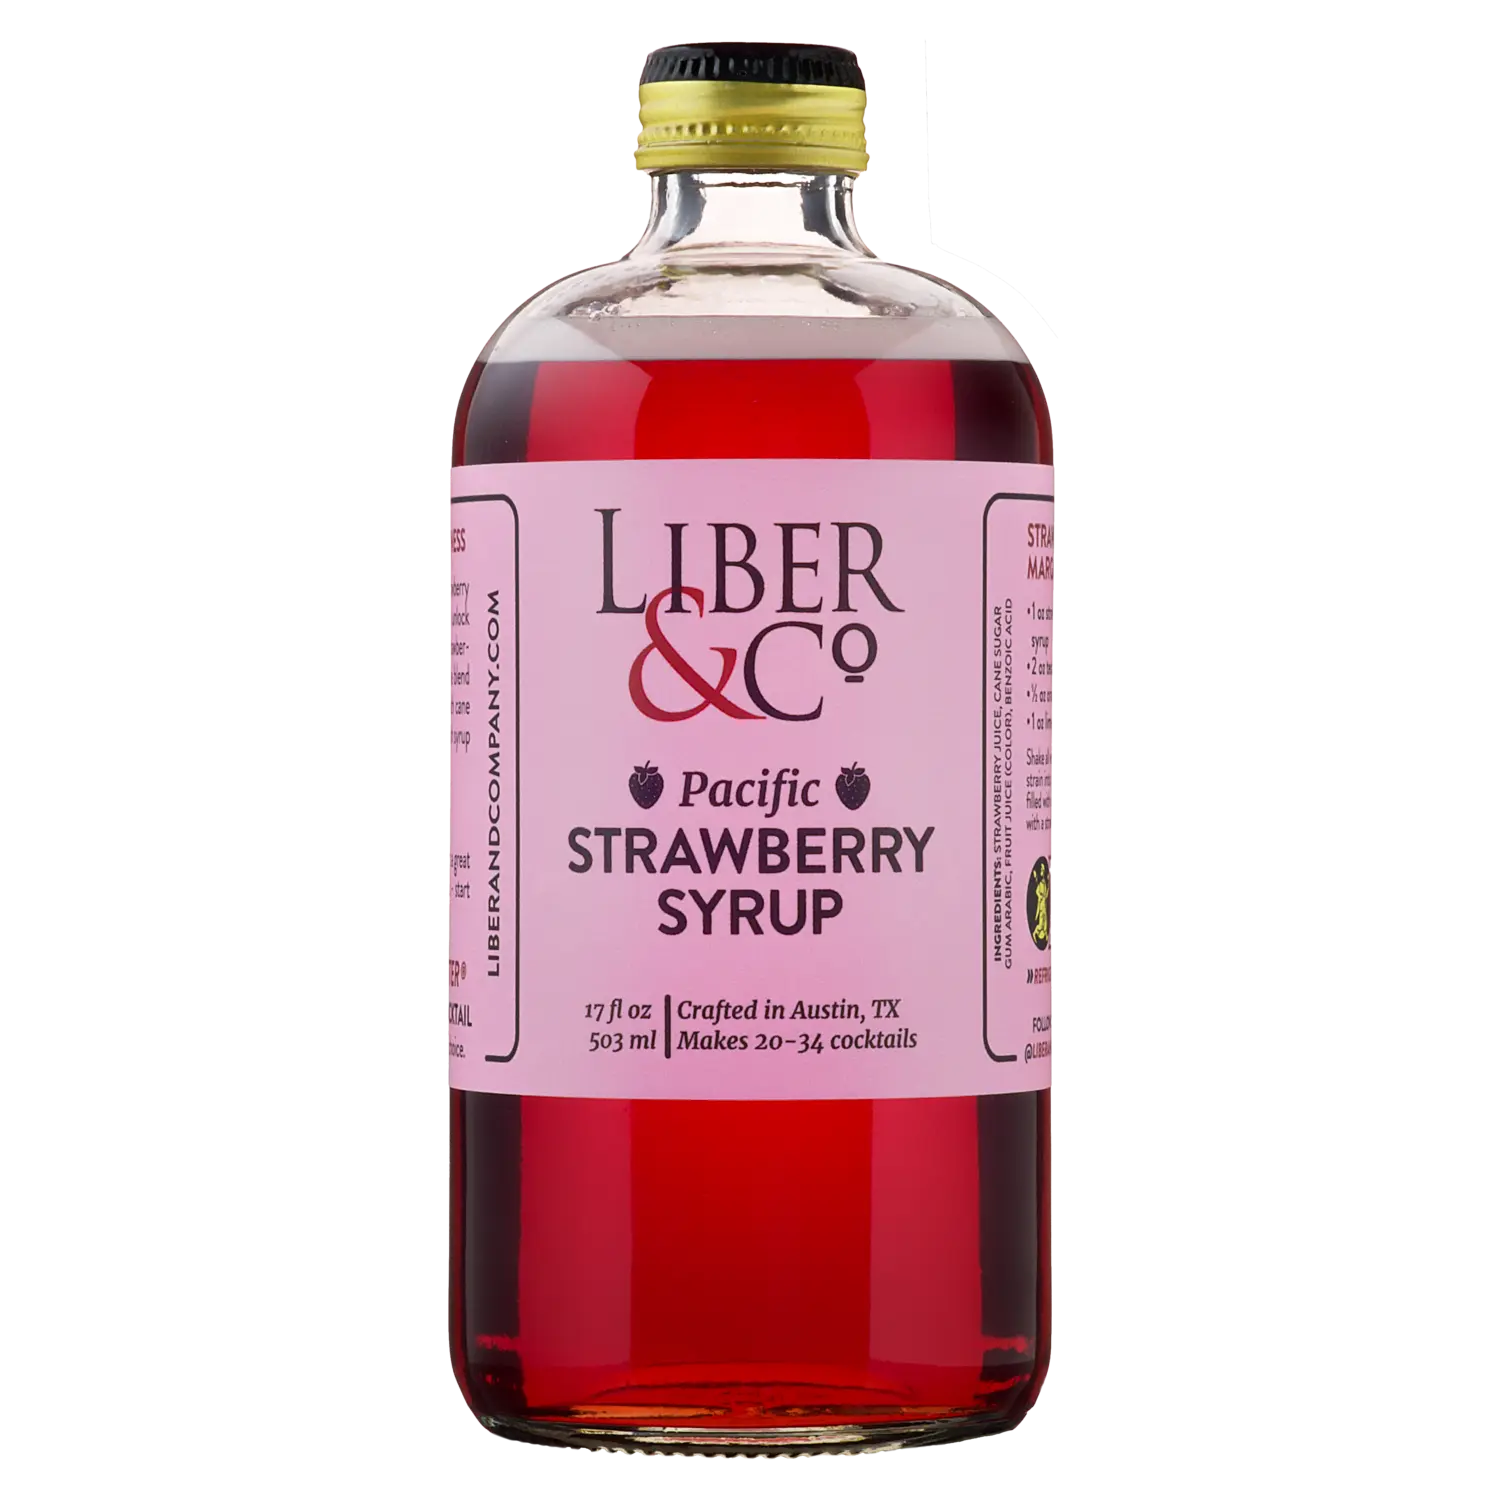 Pacific Strawberry Syrup: 17 oz - Image #1